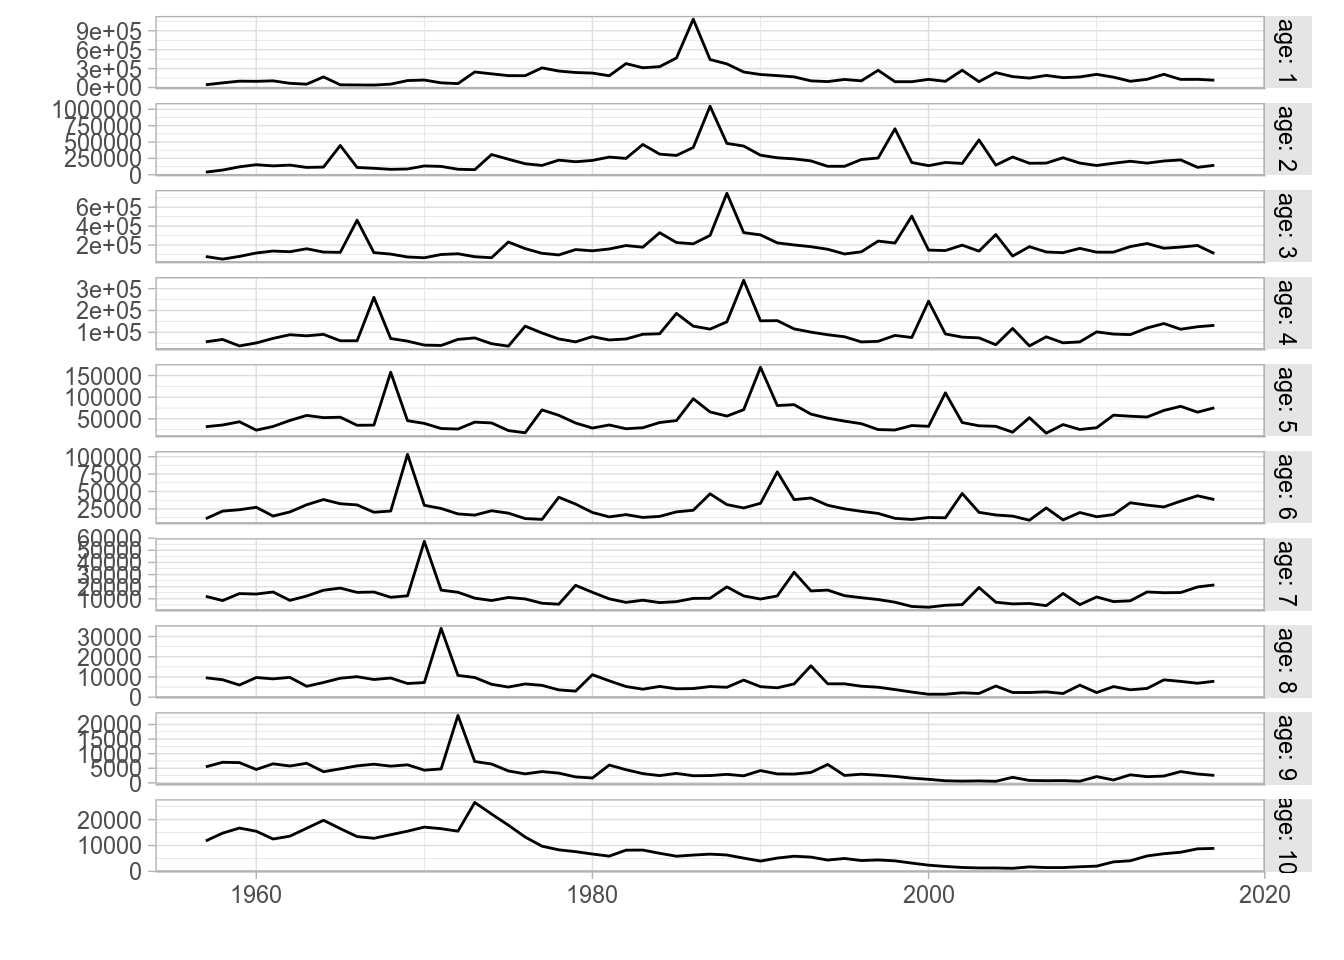 Standard ggplot2-based plot for an FLQuant object with multiple *year*s and *age*s.